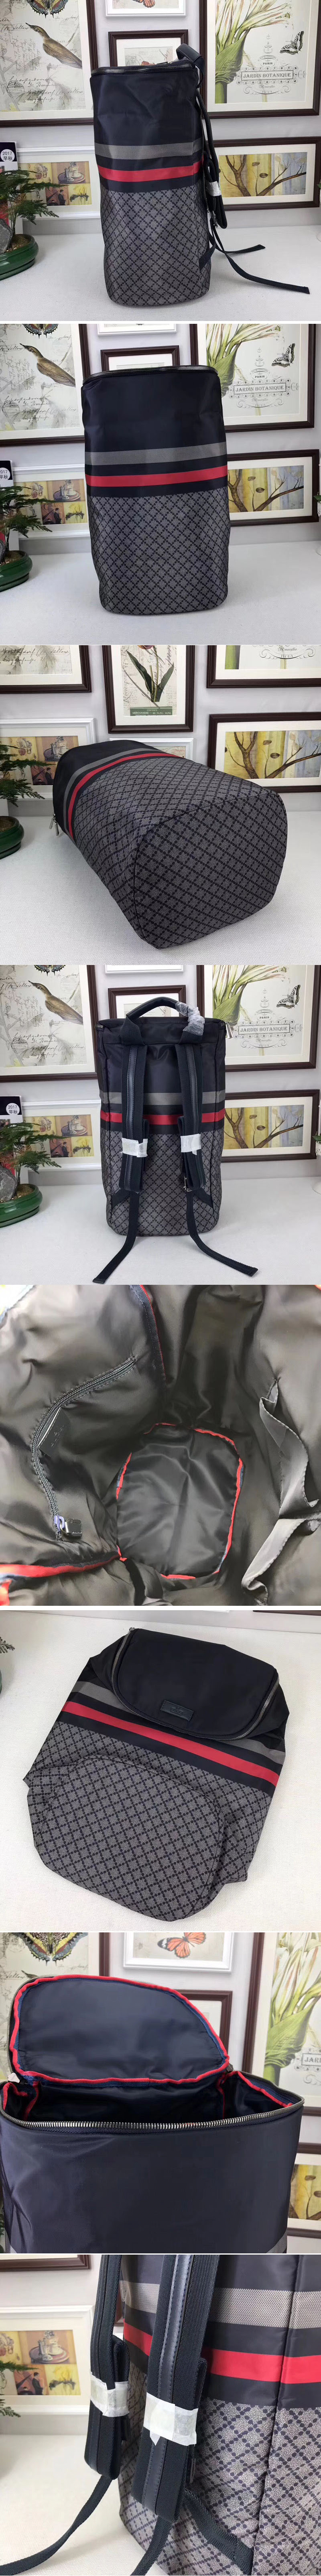 Replica Gucci 268111 Large Backpack Blue Leather 